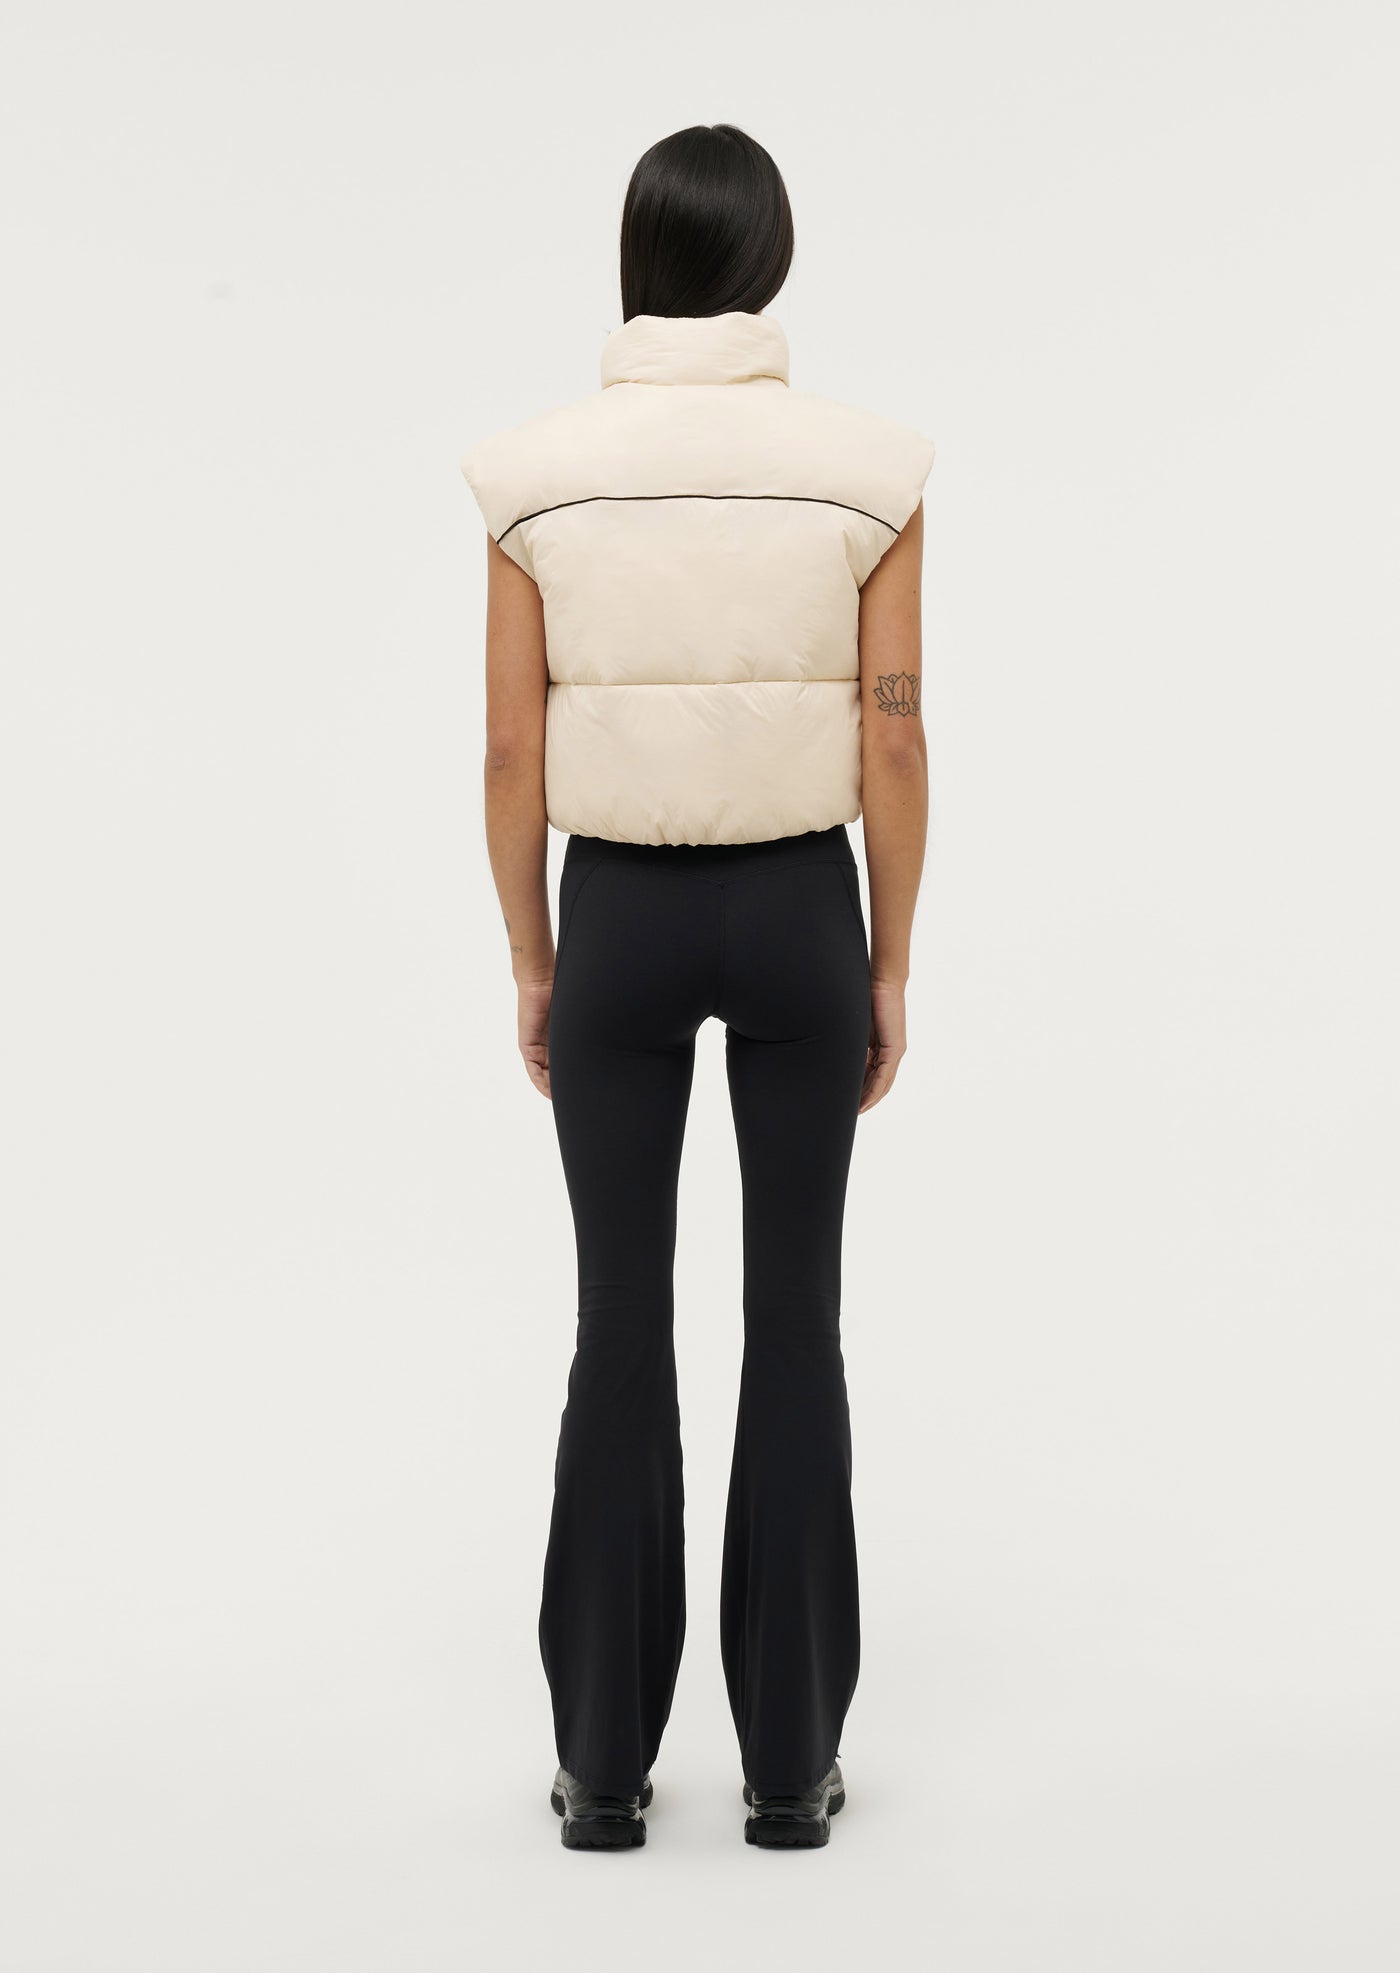 TAPER VEST IN PEARLED IVORY